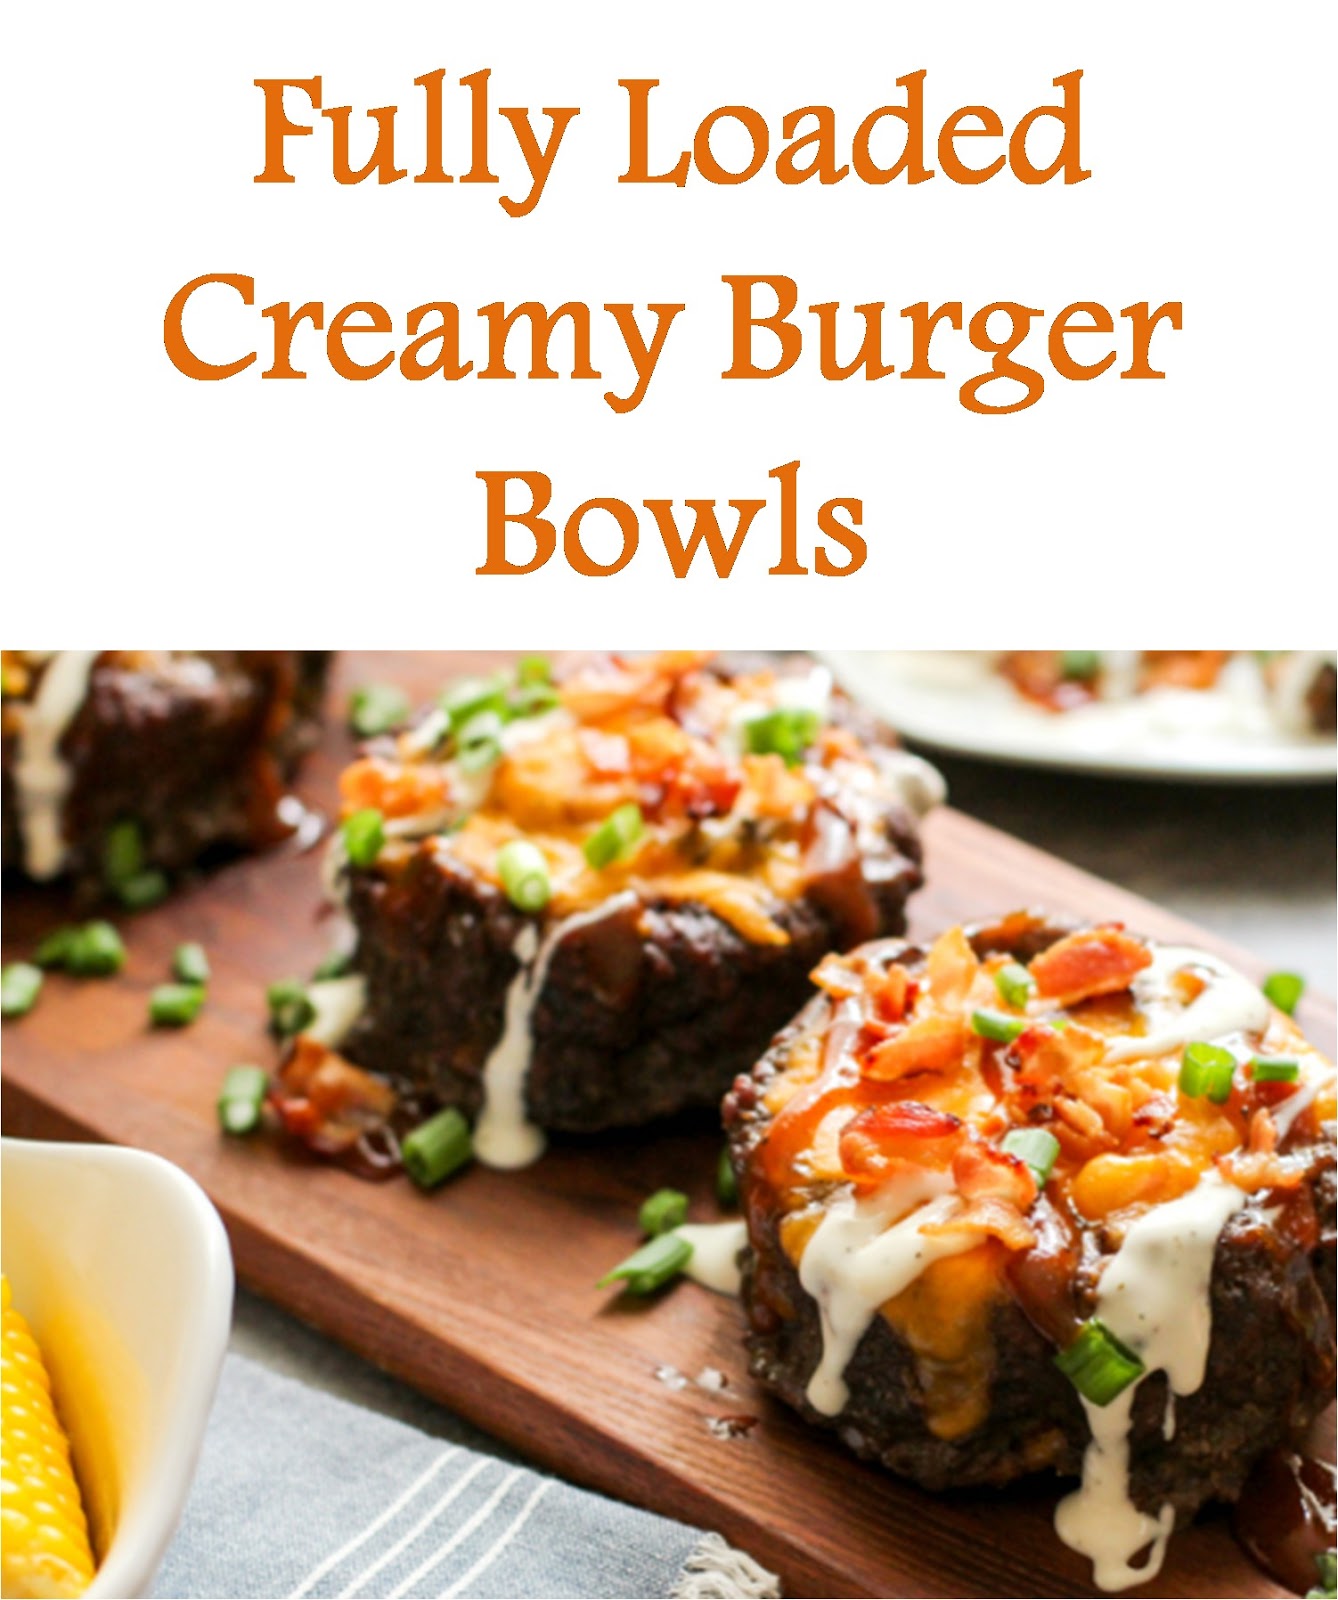 1150 Reviews: My BEST #Recipes >> Fully Loaded Creamy #Burger #Bowls - ~~~.